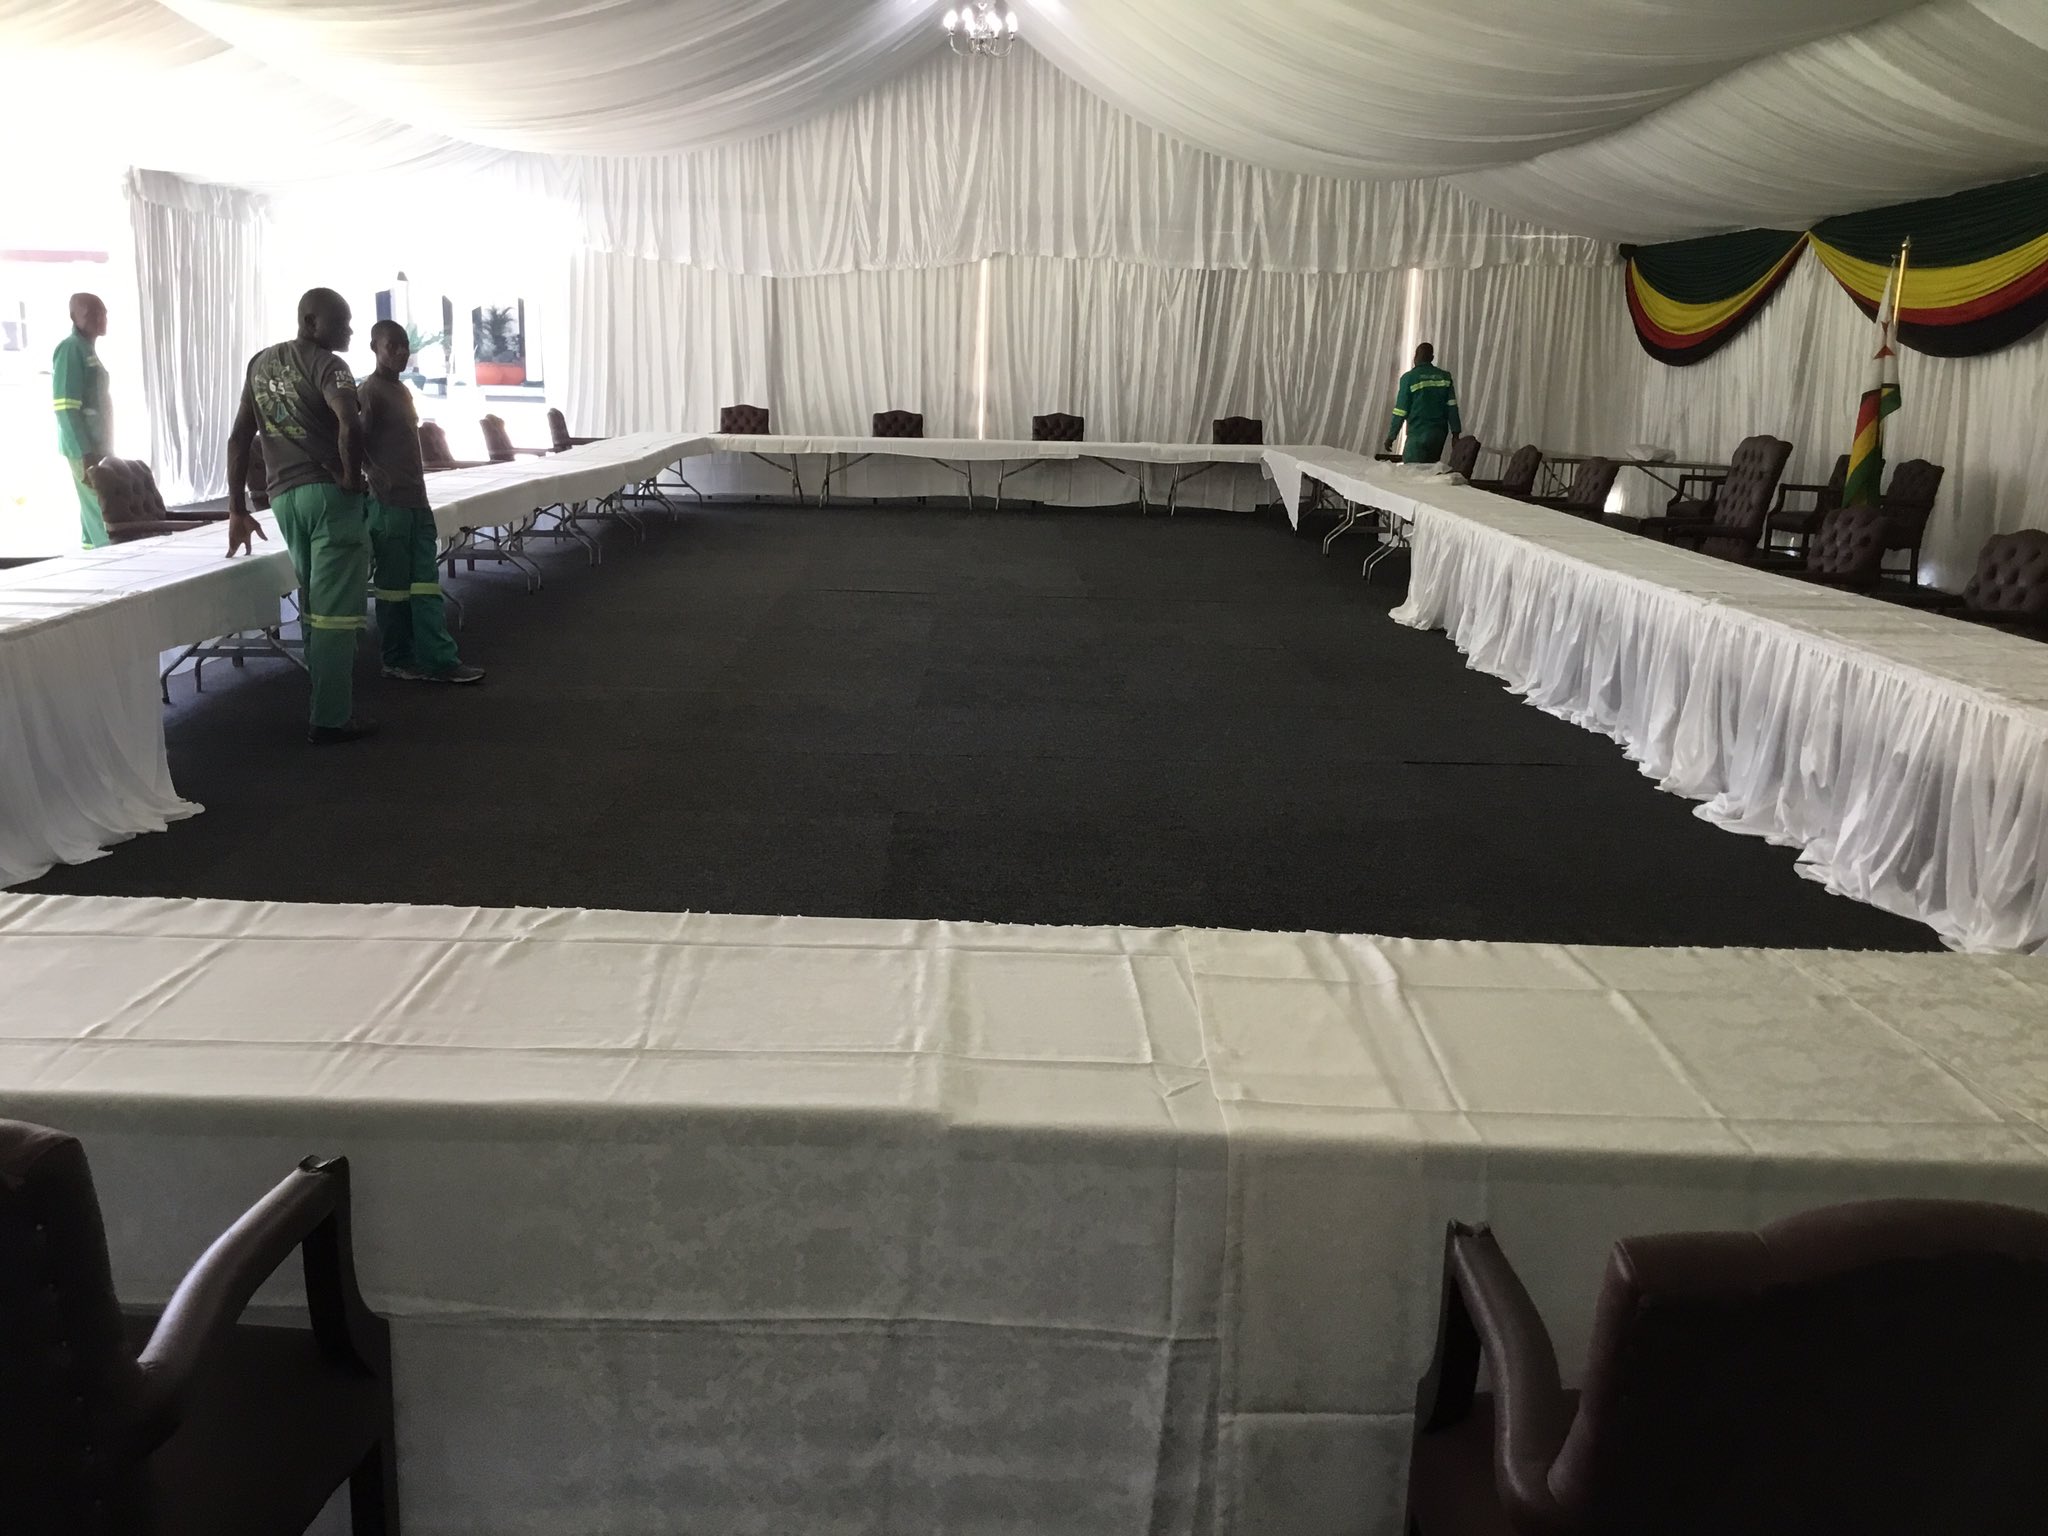 ED Holds Cabinet Meeting Under Tent